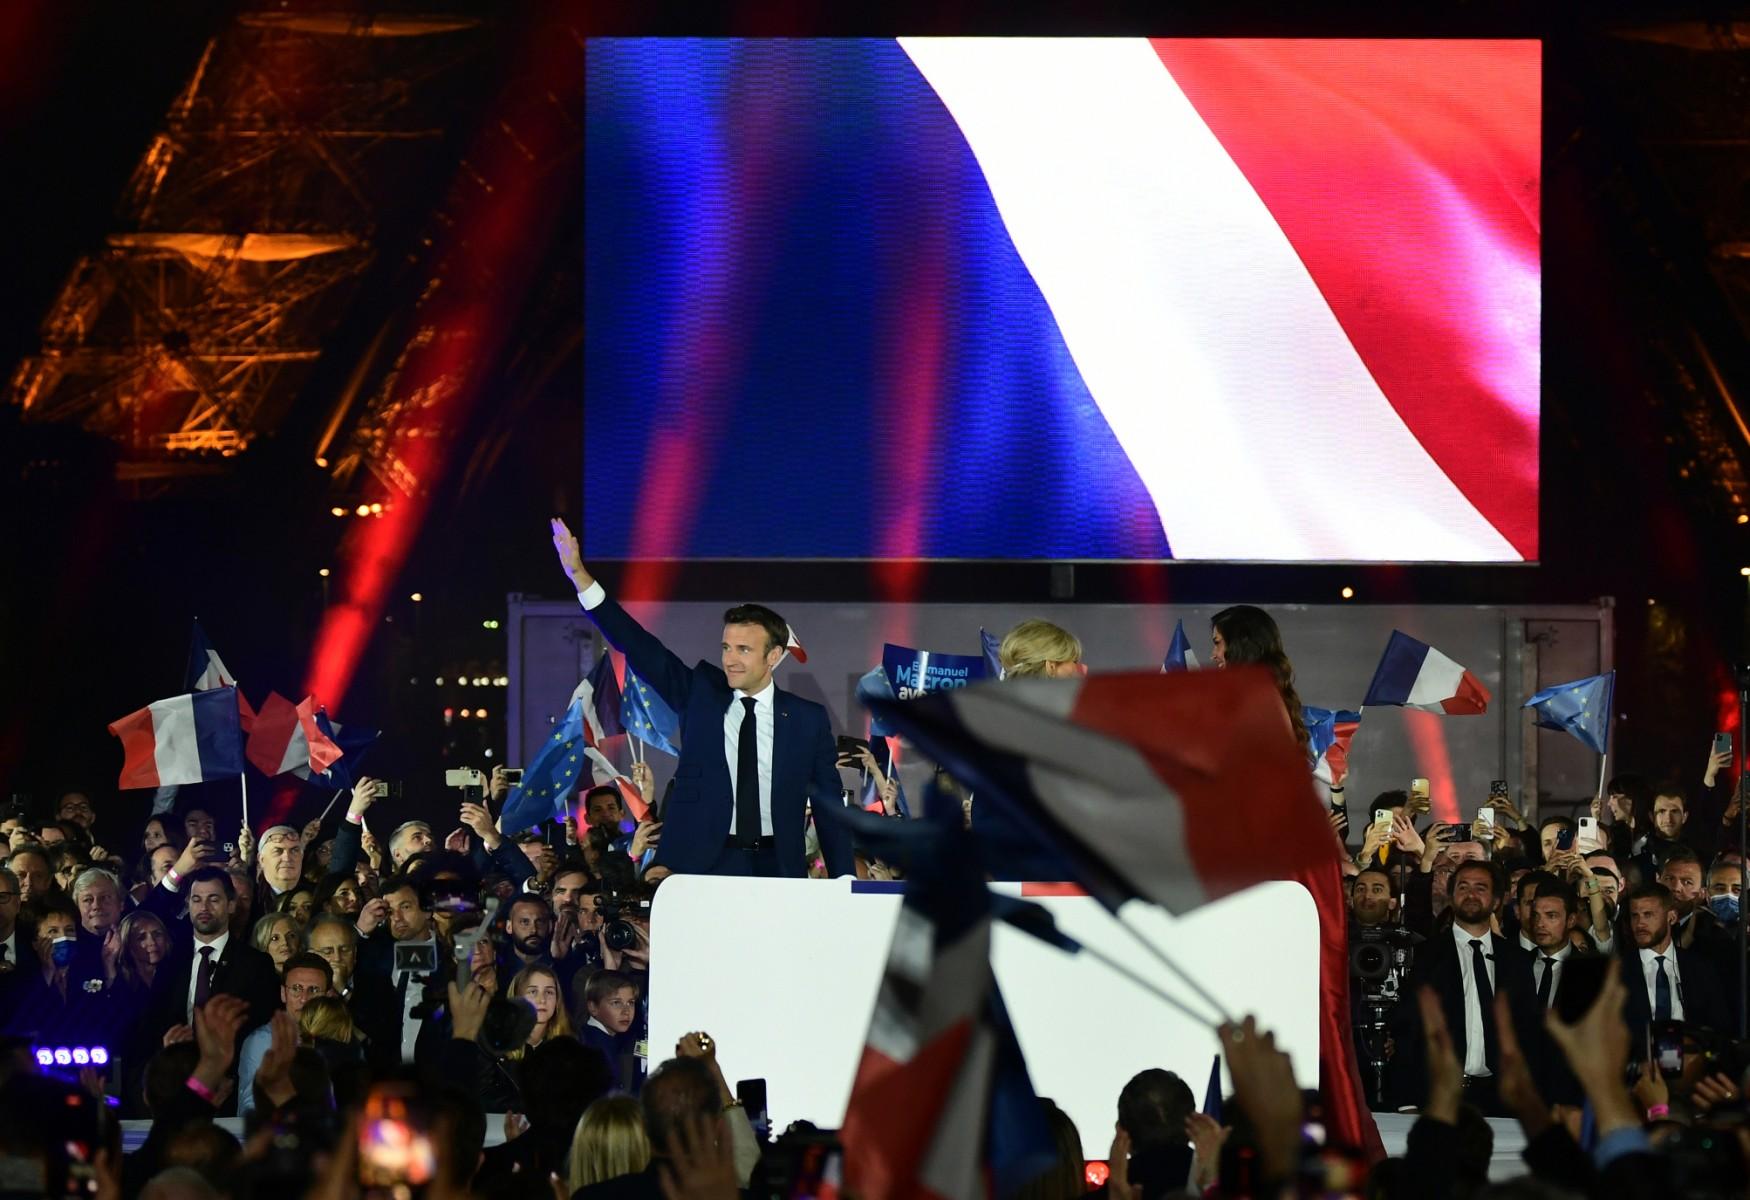 French President Emmanuel Macron and his wife Brigitte celebrate after his victory in France's presidential election, at the Champ de Mars in Paris, on April 24. Photo: AFP